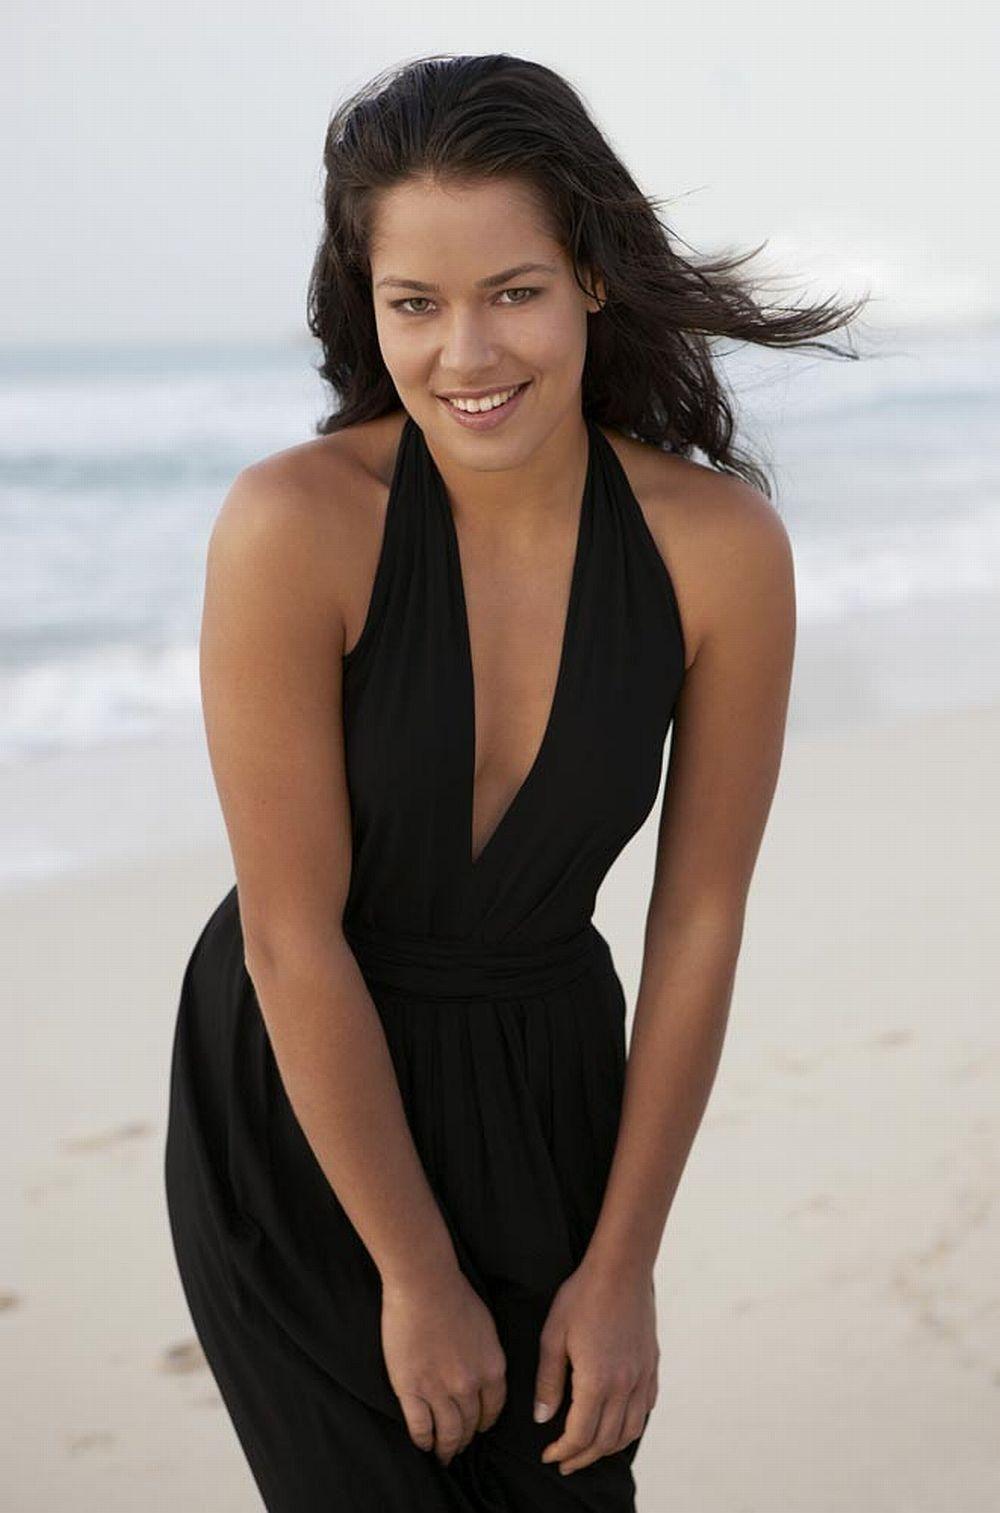 50+ Hottest Ana Ivanovic Pictures That Are Heaven On Earth | Best Of Comic Books